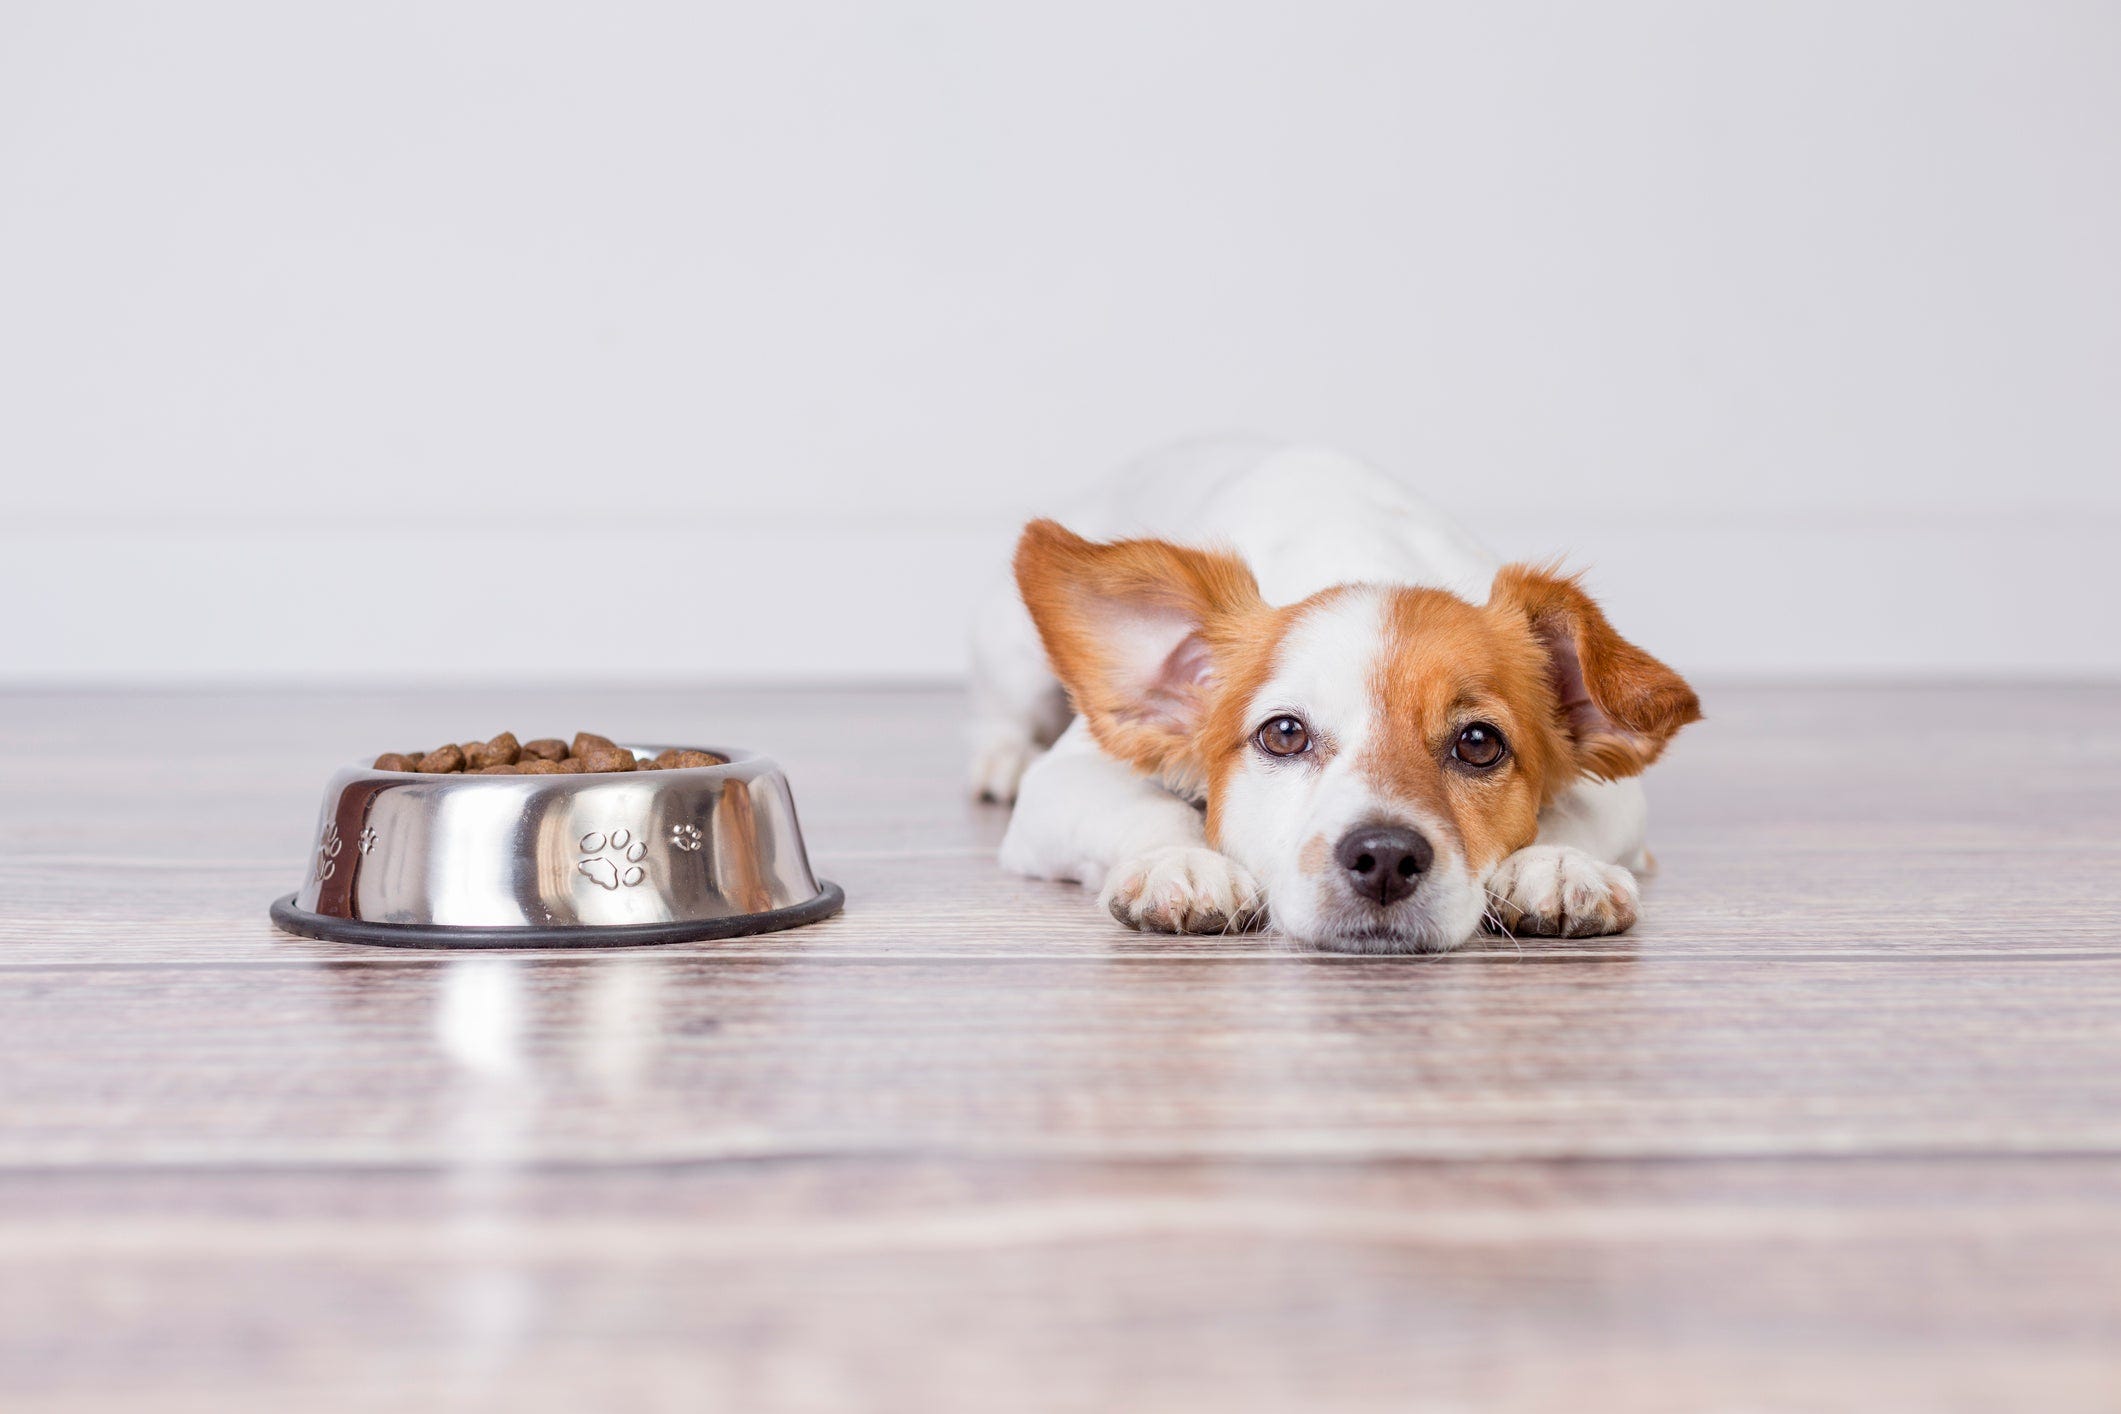 What human foods are safe for dogs to eat? Here's what is and isn't safe for your pet